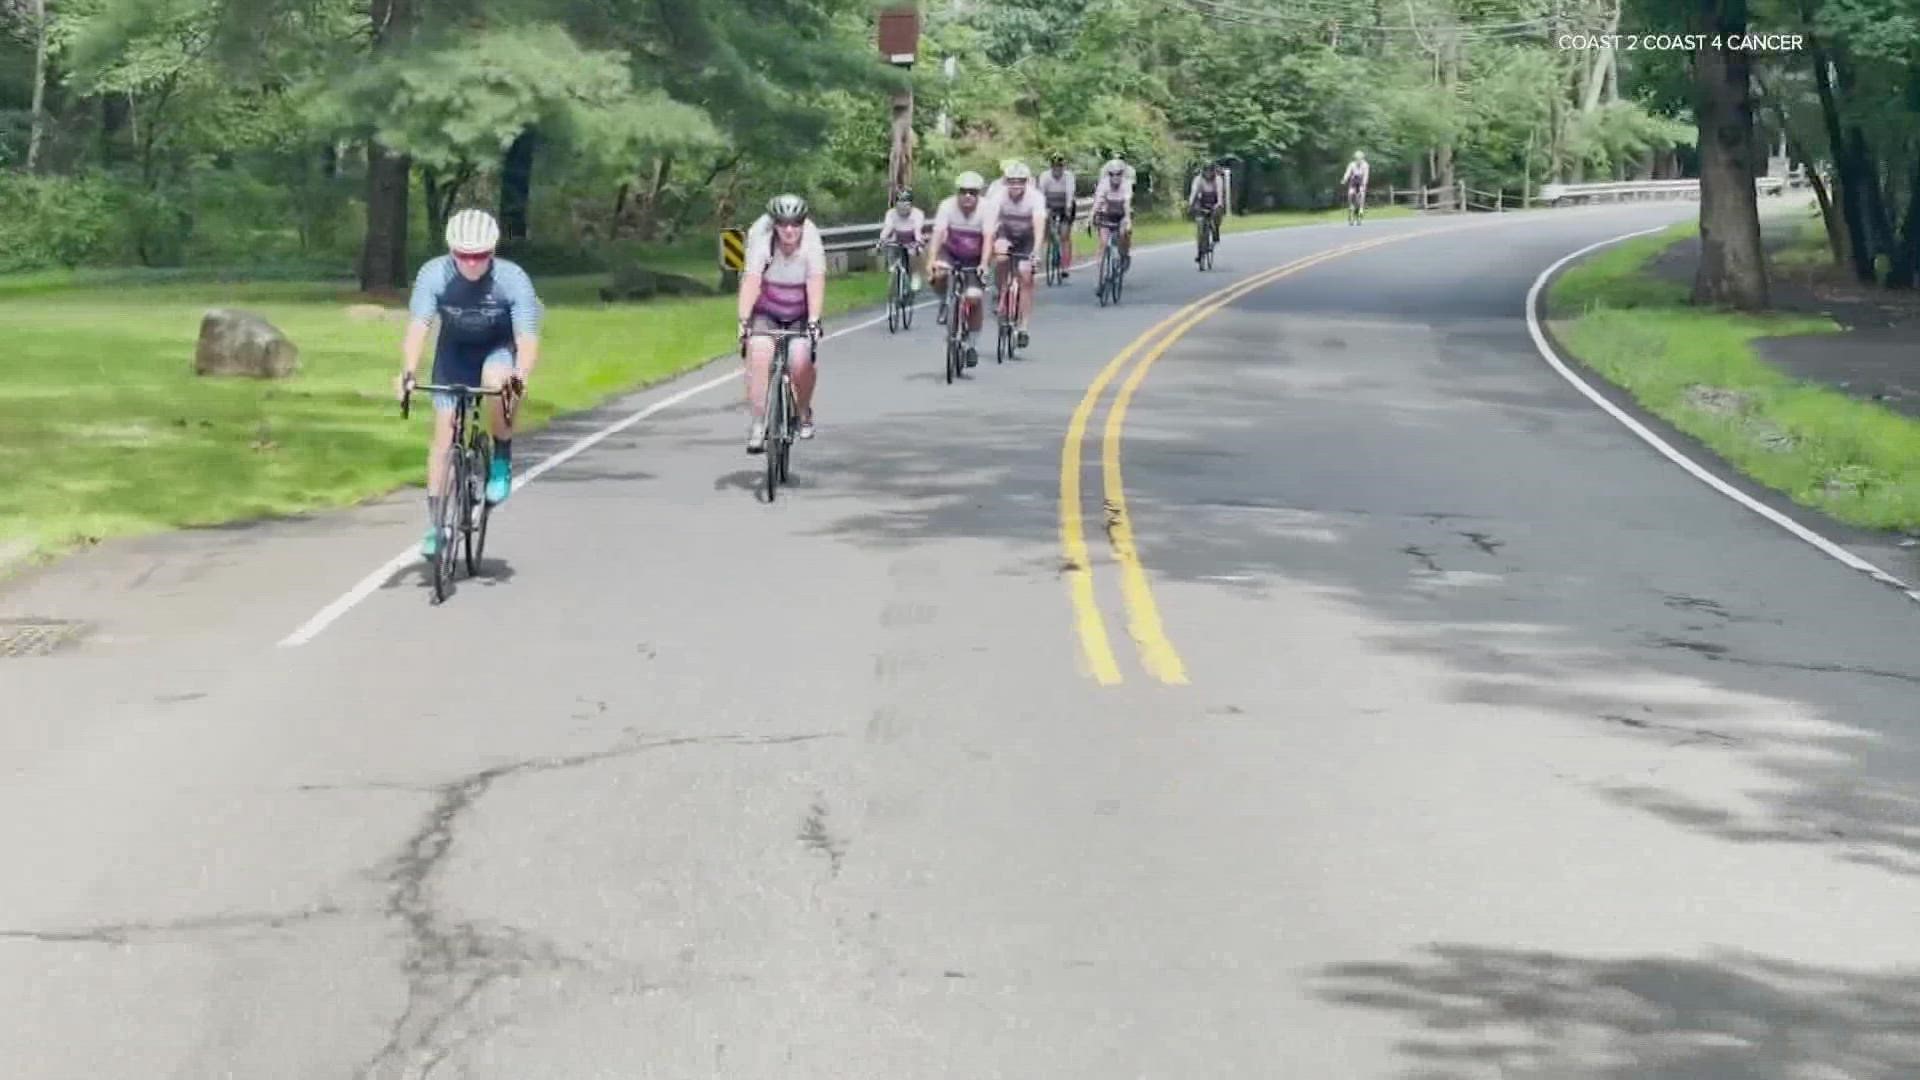 A ground of cyclists making their way from coast to coast will stop at Lucas Oil Stadium Wednesday morning. It's all in an effort to raise money for cancer research.